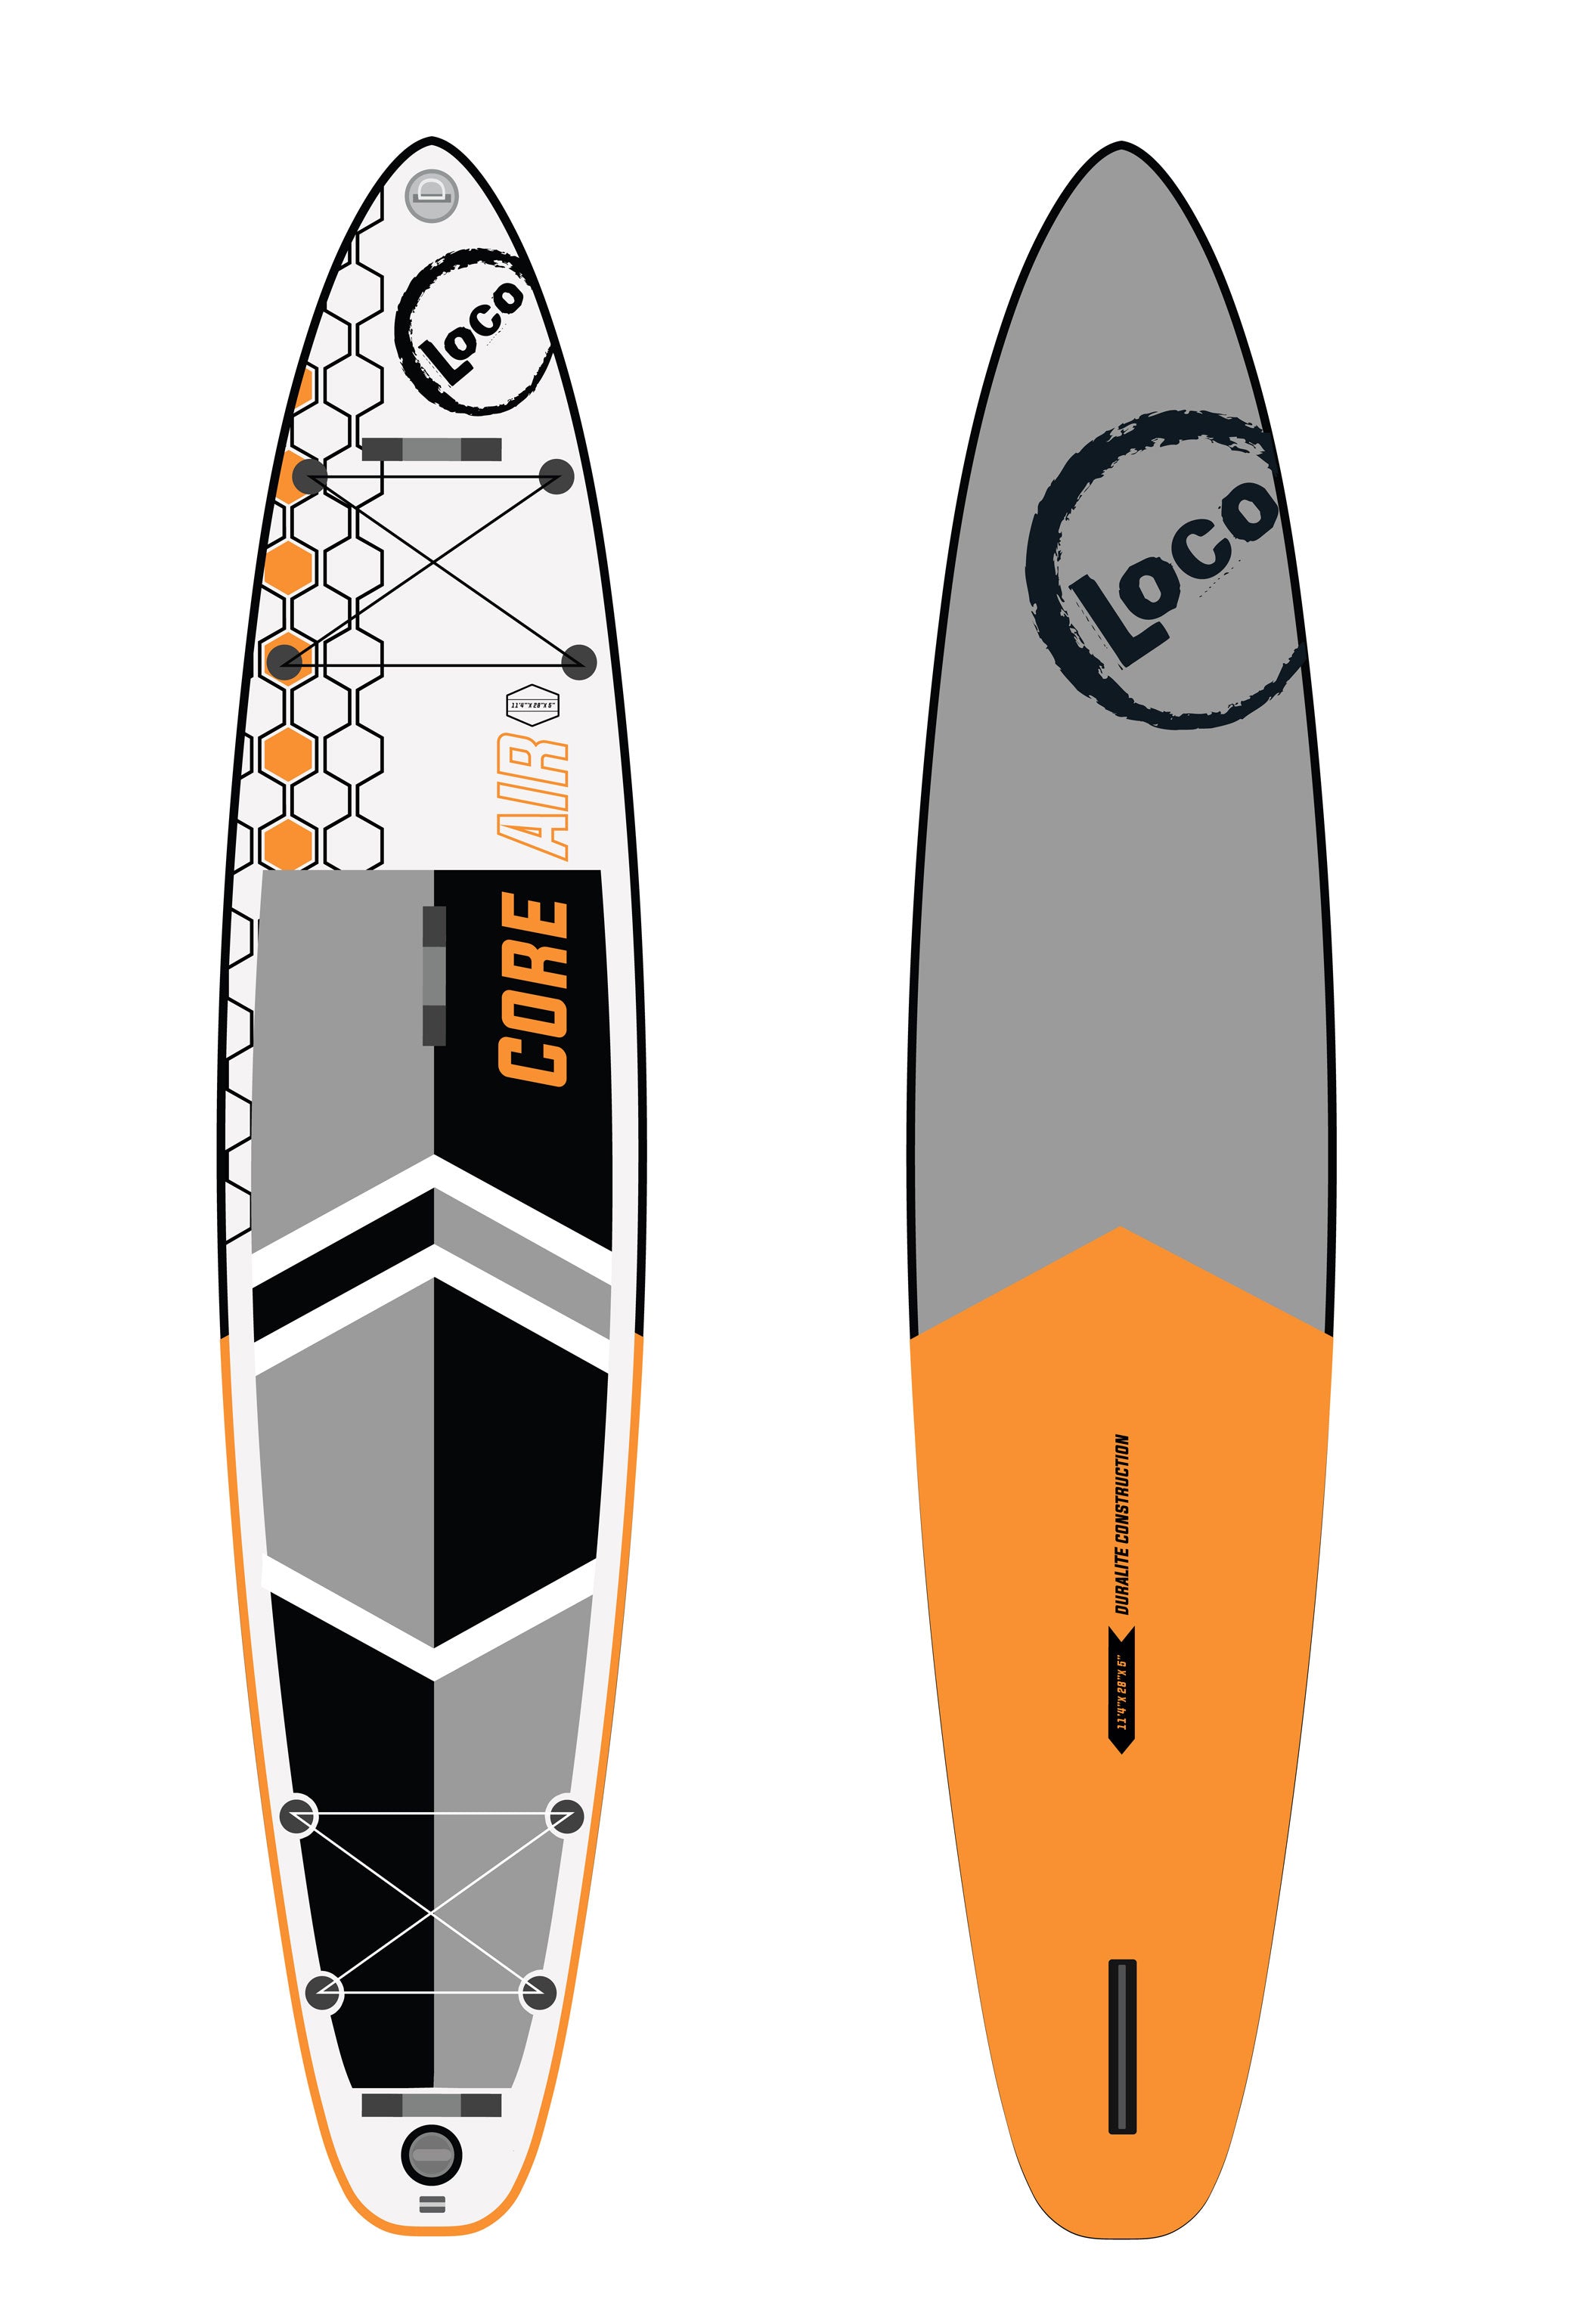 Loco Core Air Inflatable Paddleboard, Loco Core Air Inflatable Paddleboard 11’8 x 28”